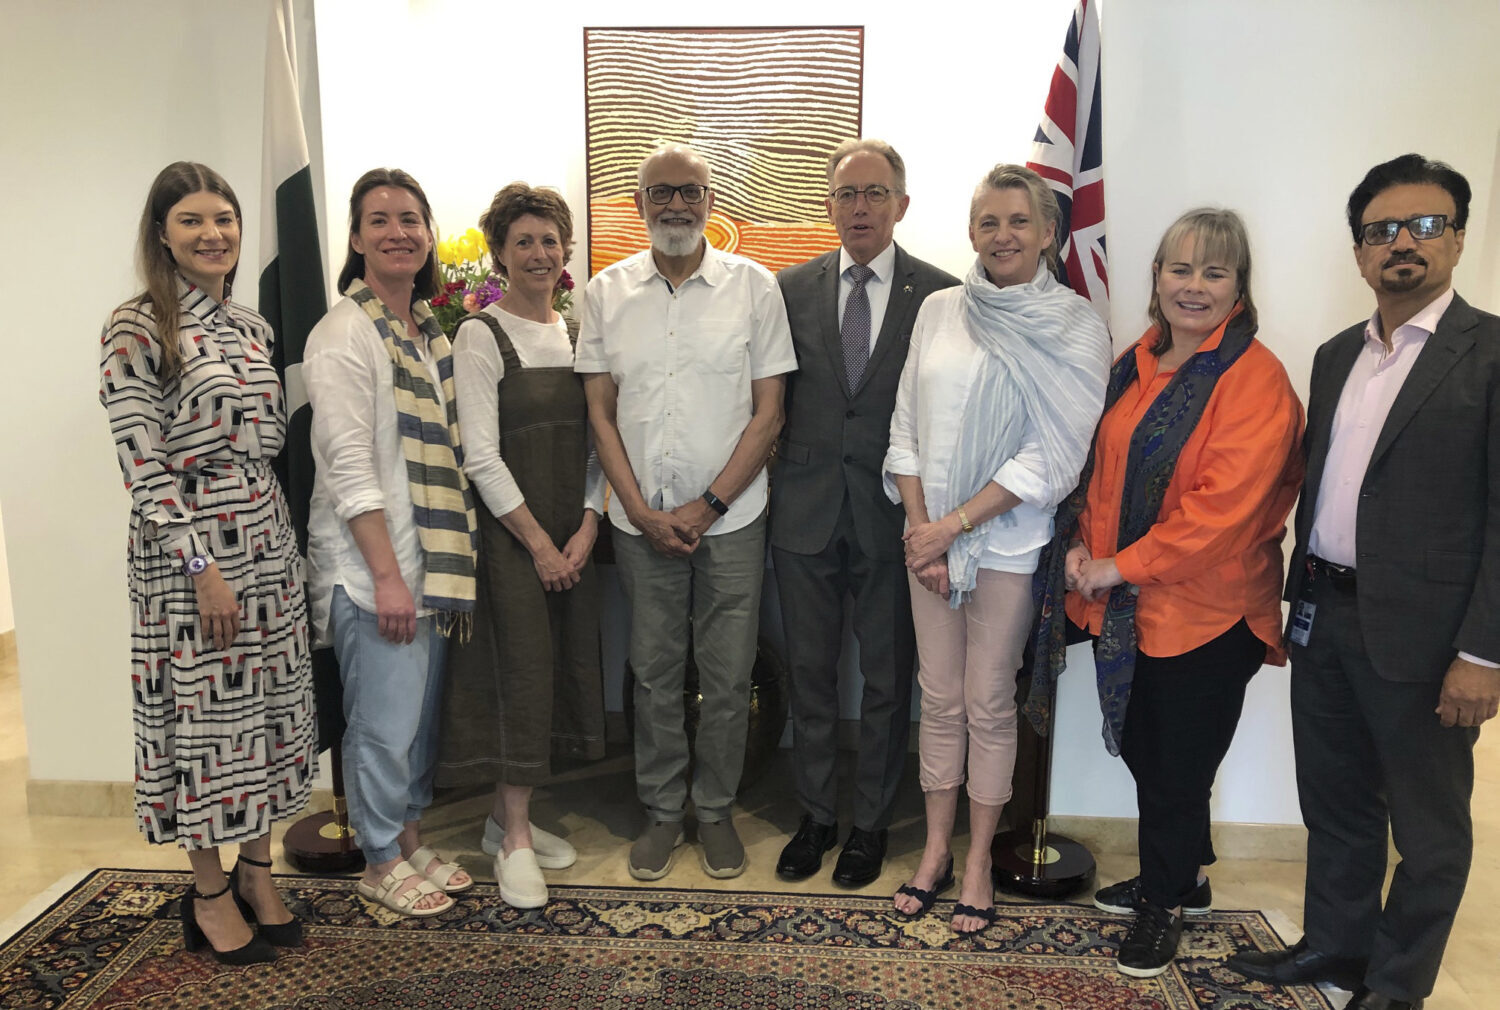 The team of researchers from Charles Sturt University (CSU) including Condobolin’s Diana Fear (third from left) with the Australian High Commissioner, Islamabad. Image Contributed.